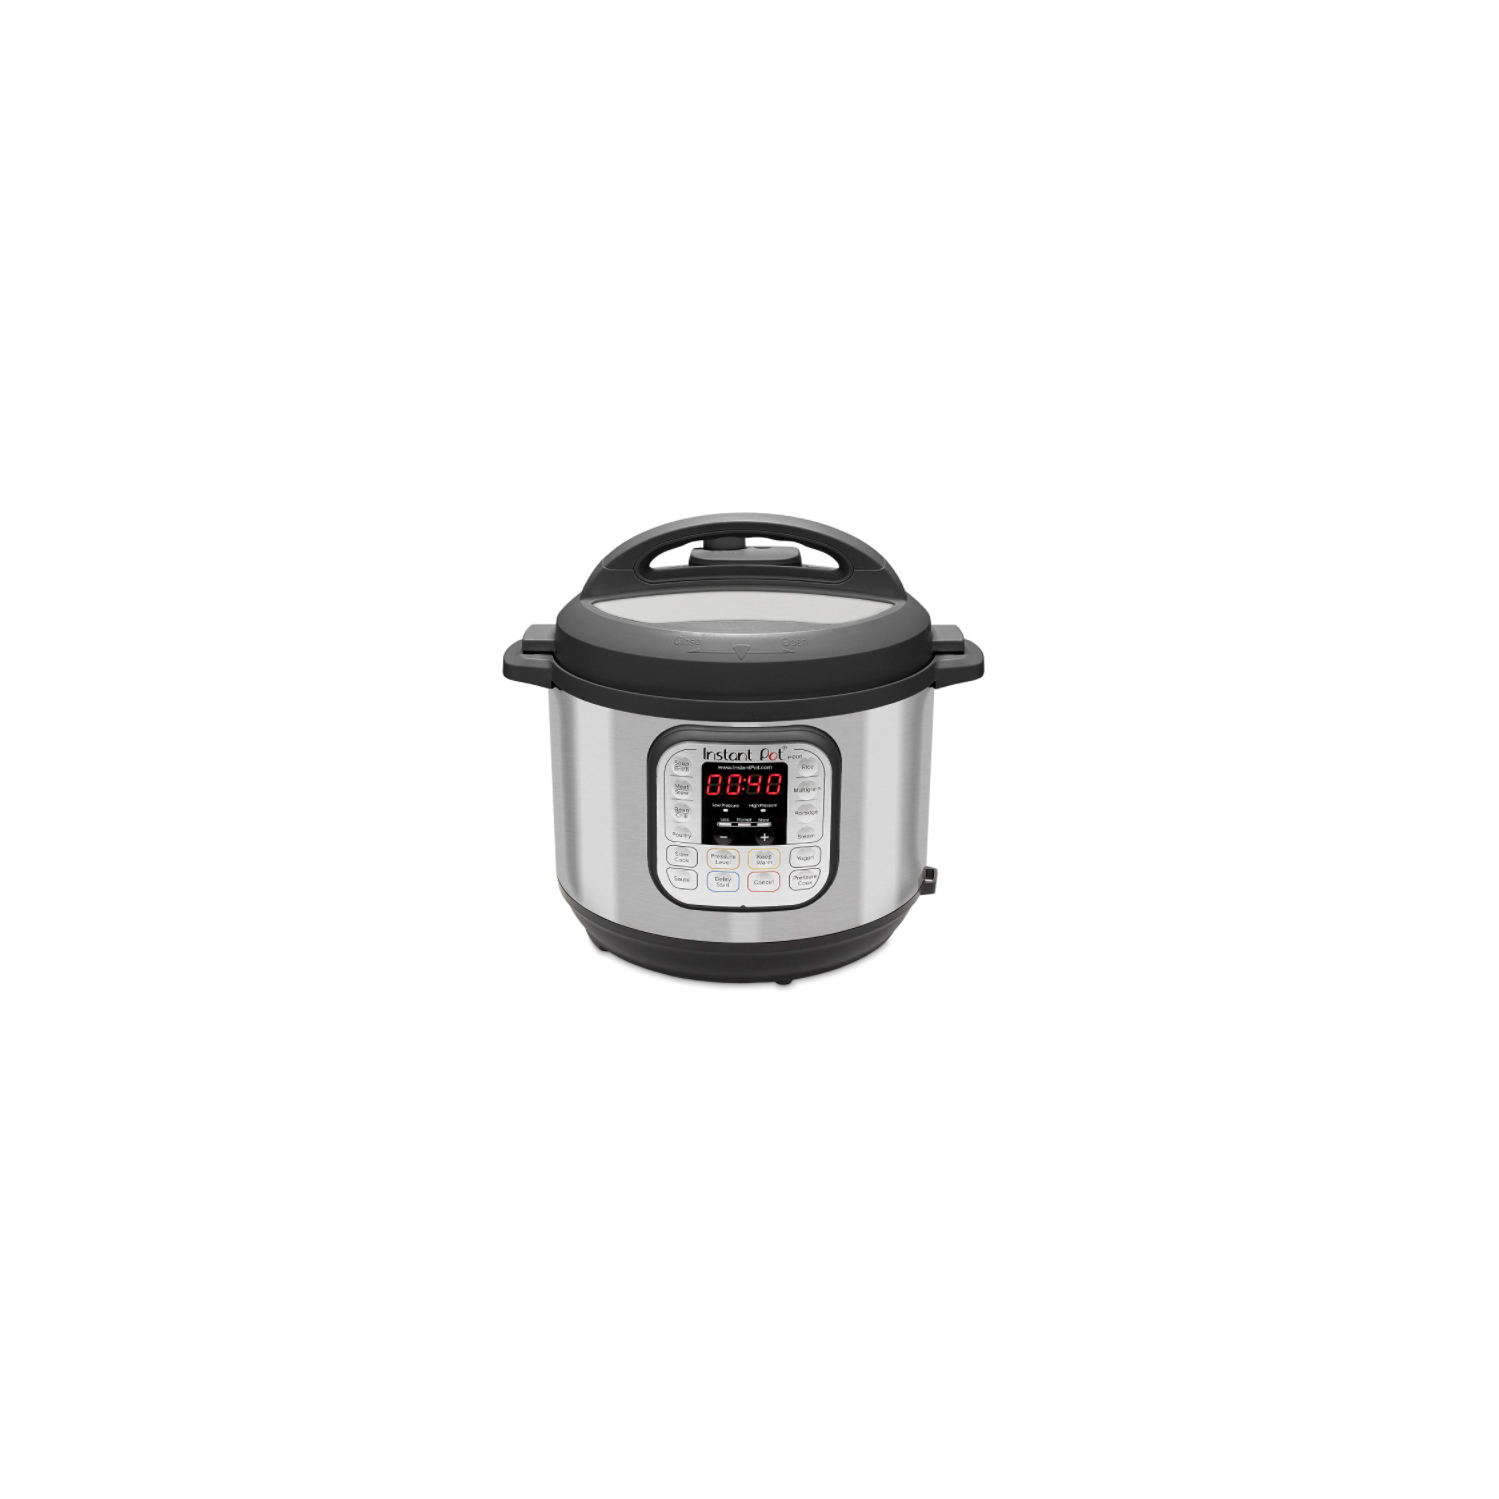 Instant Pot Duo 7-in-1 Electric Pressure Cooker, Slow Cooker, Rice Cooker, Steamer, Saute, Yogurt Maker, and Warmer